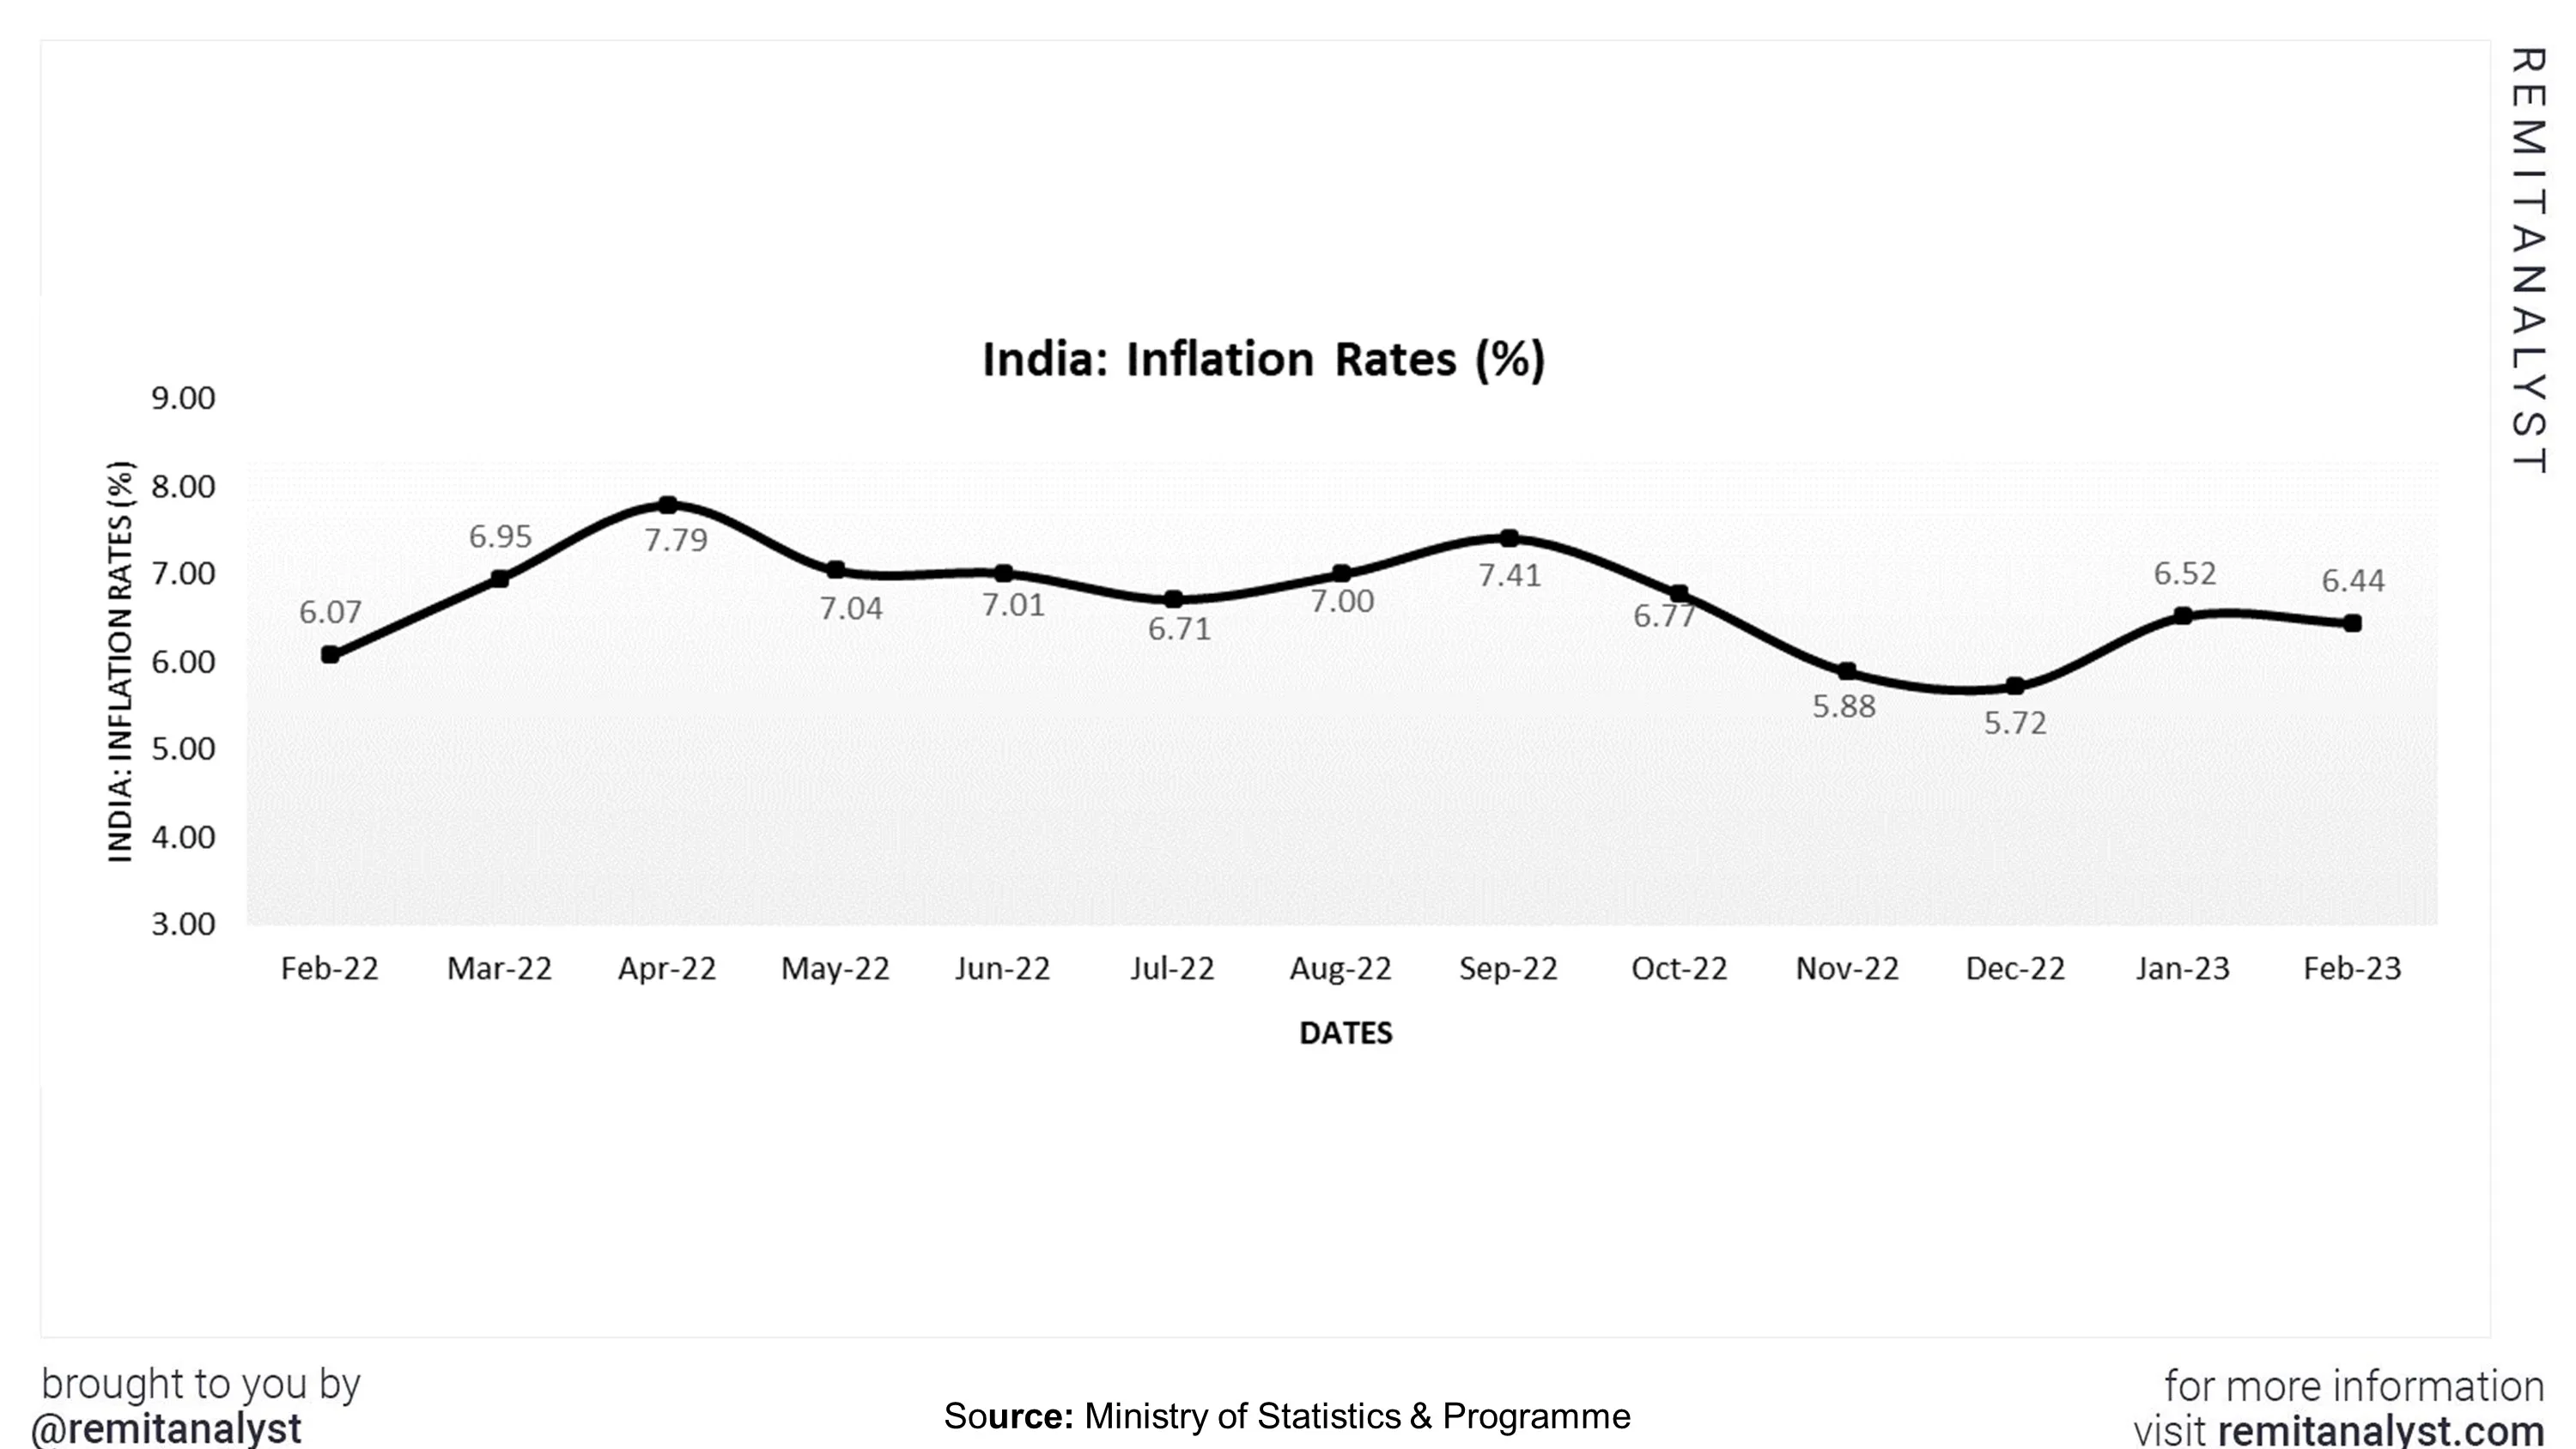 inflation-rates-india-from-feb-2022-to-feb-2023